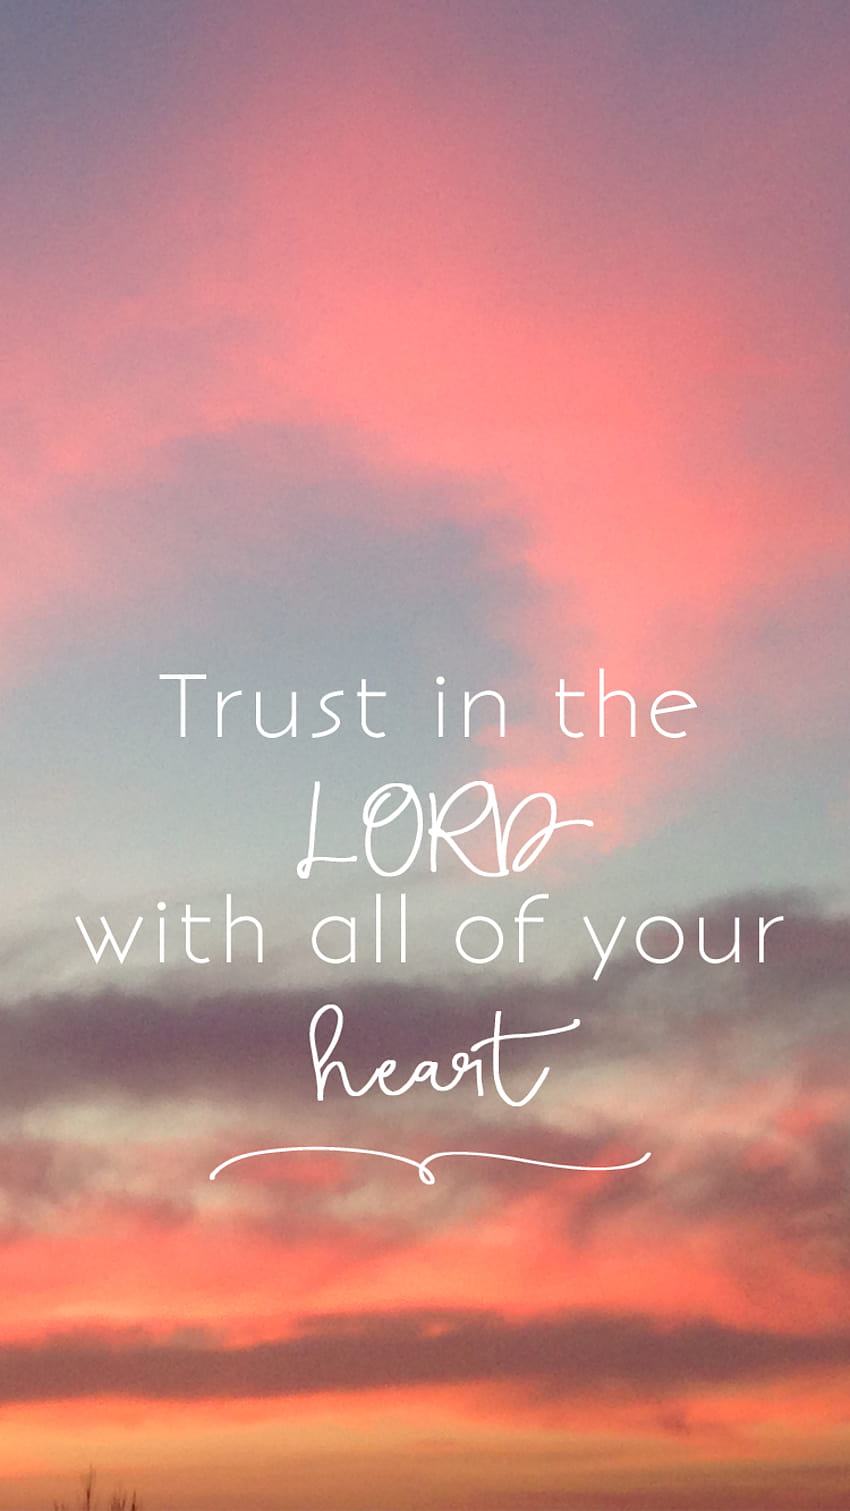 Trust In The Lord Wit All Your Heart Iphone, jesus i trust in you HD phone wallpaper